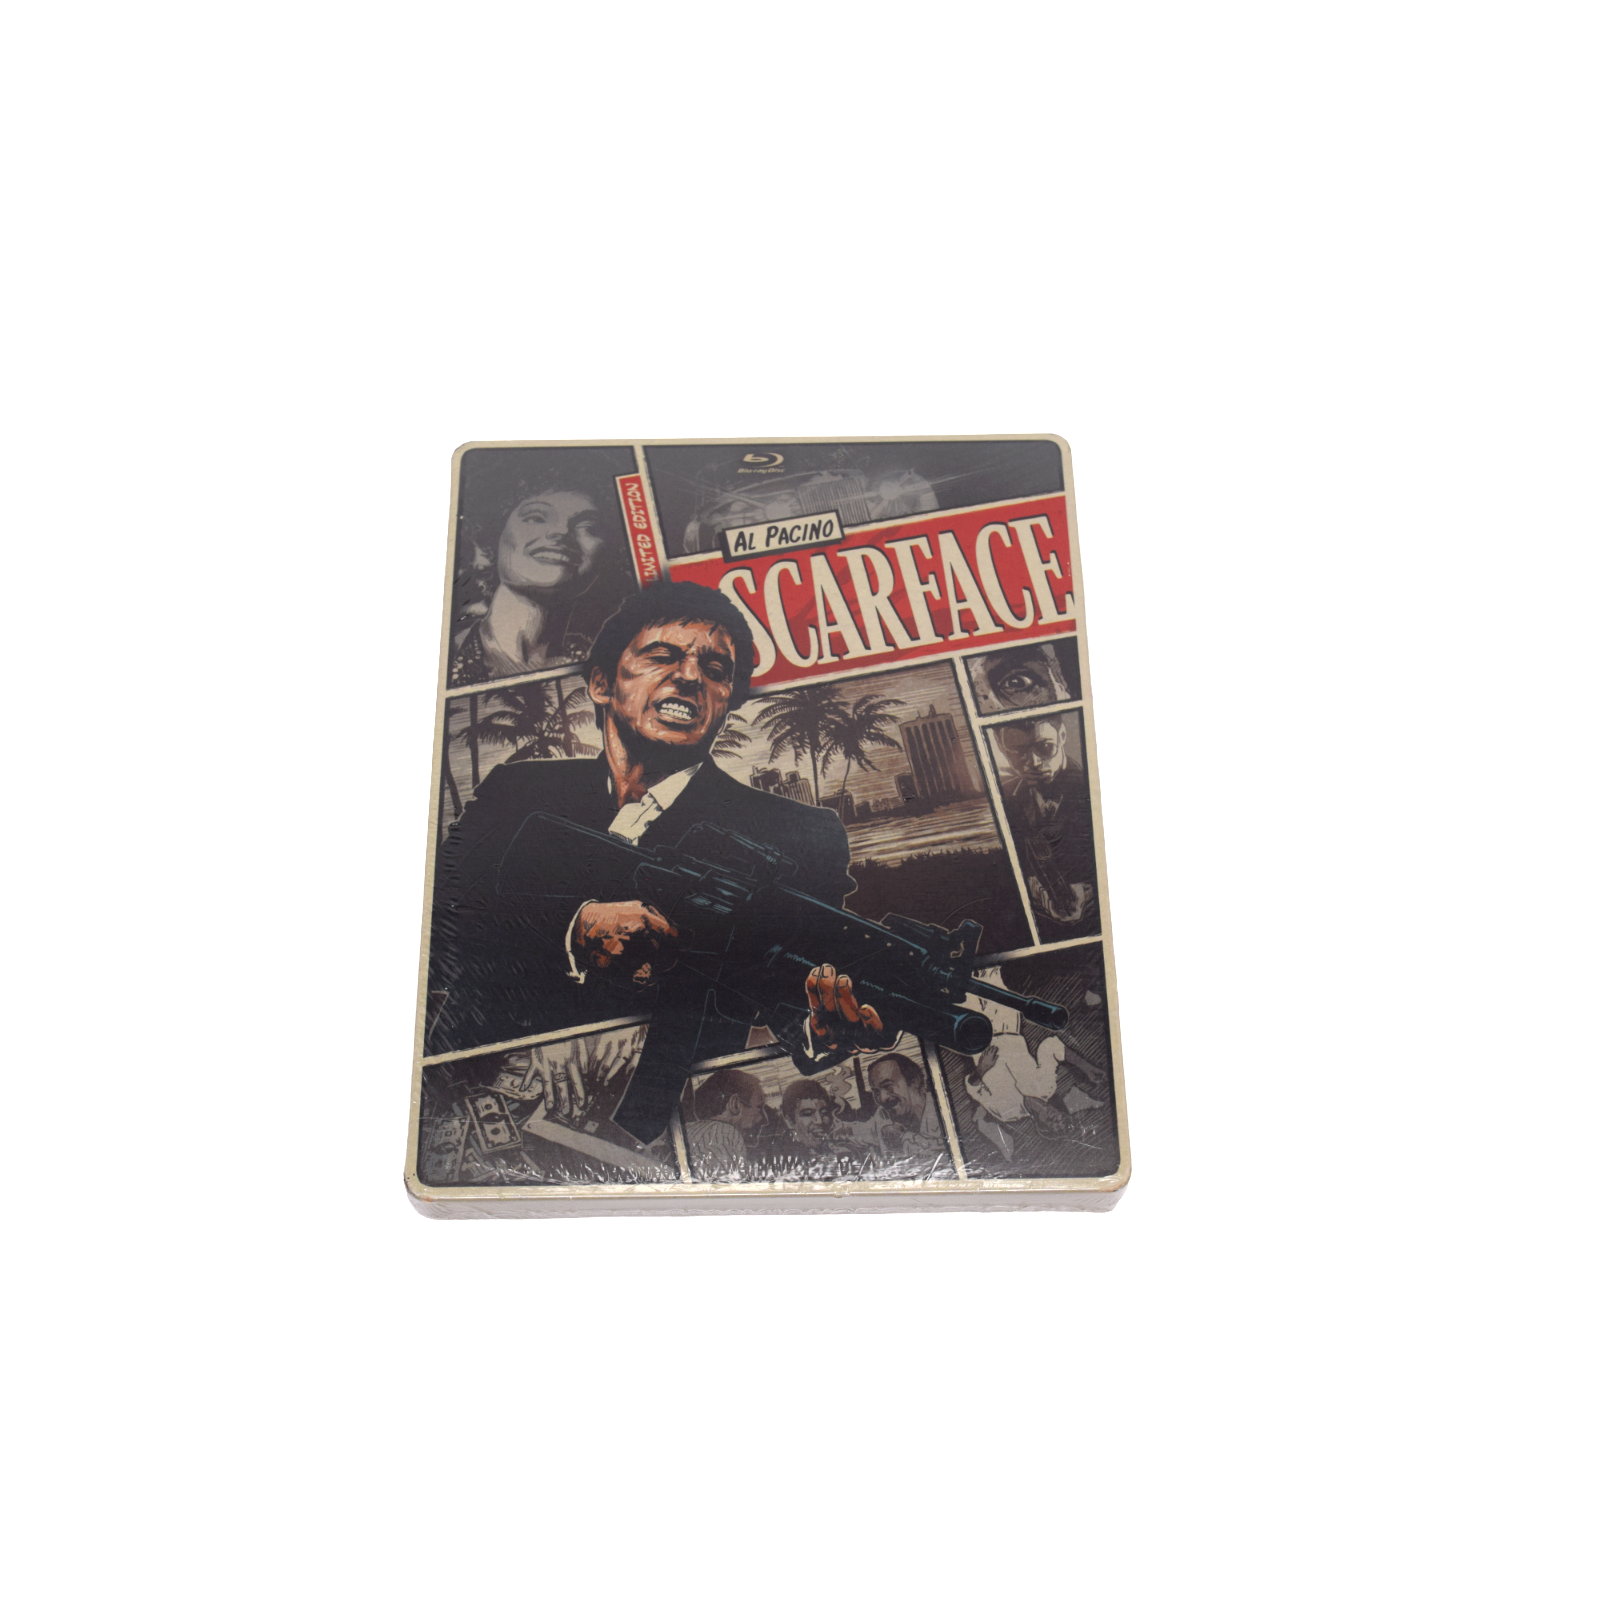 Primary image for Scarface Comic Steelbook (Blu-ray/DVD, 2-Disc Set)